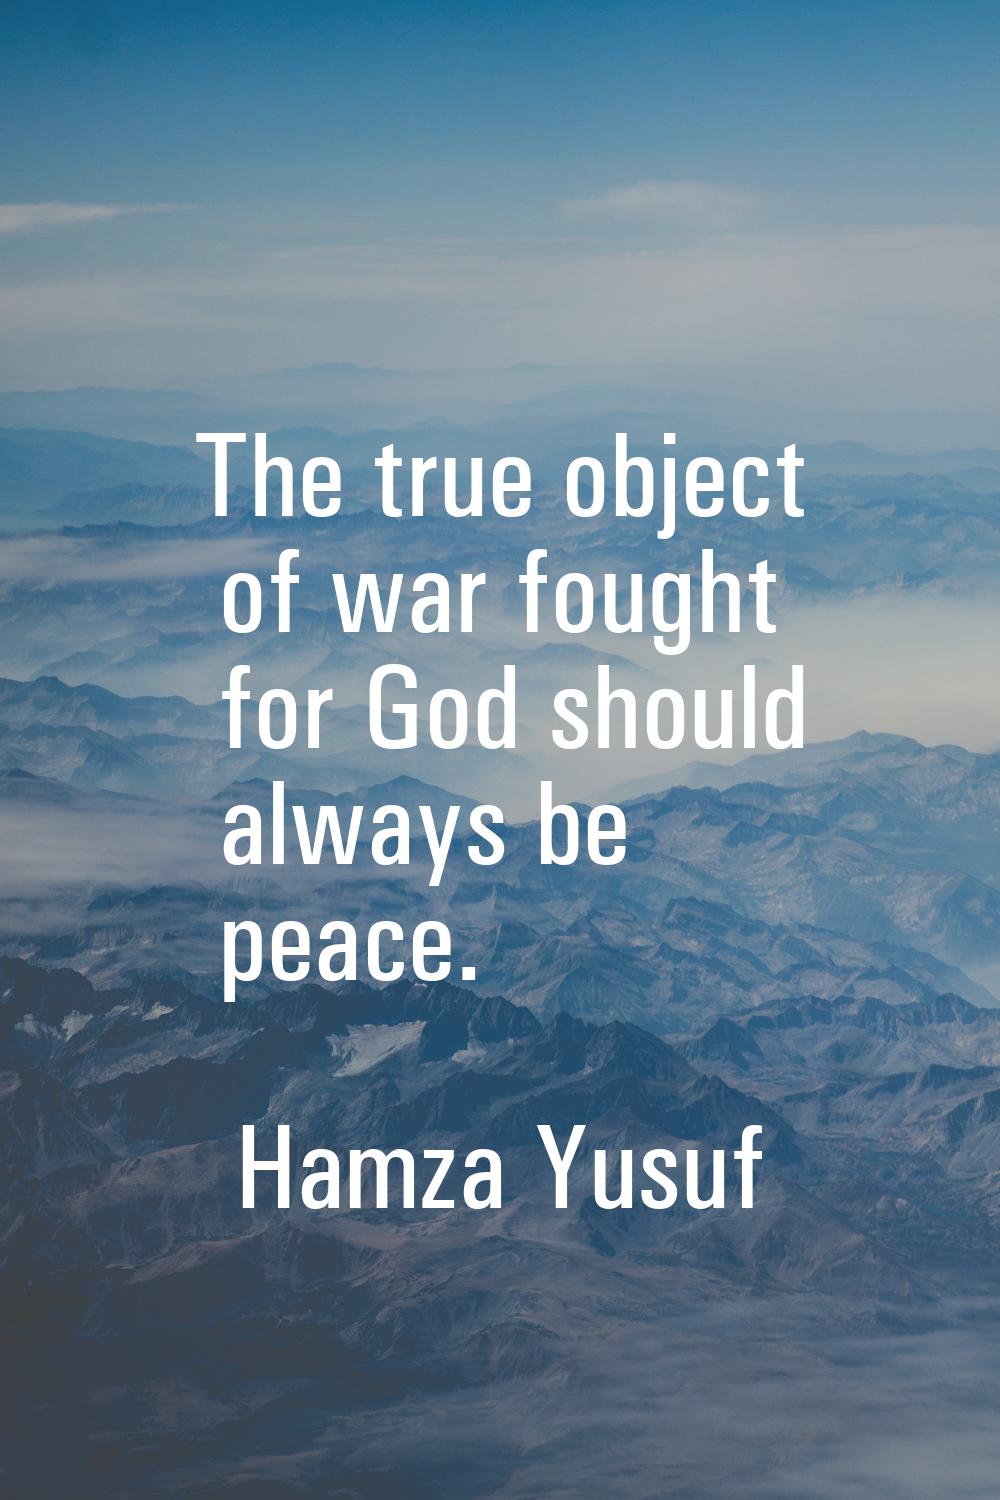 The true object of war fought for God should always be peace.